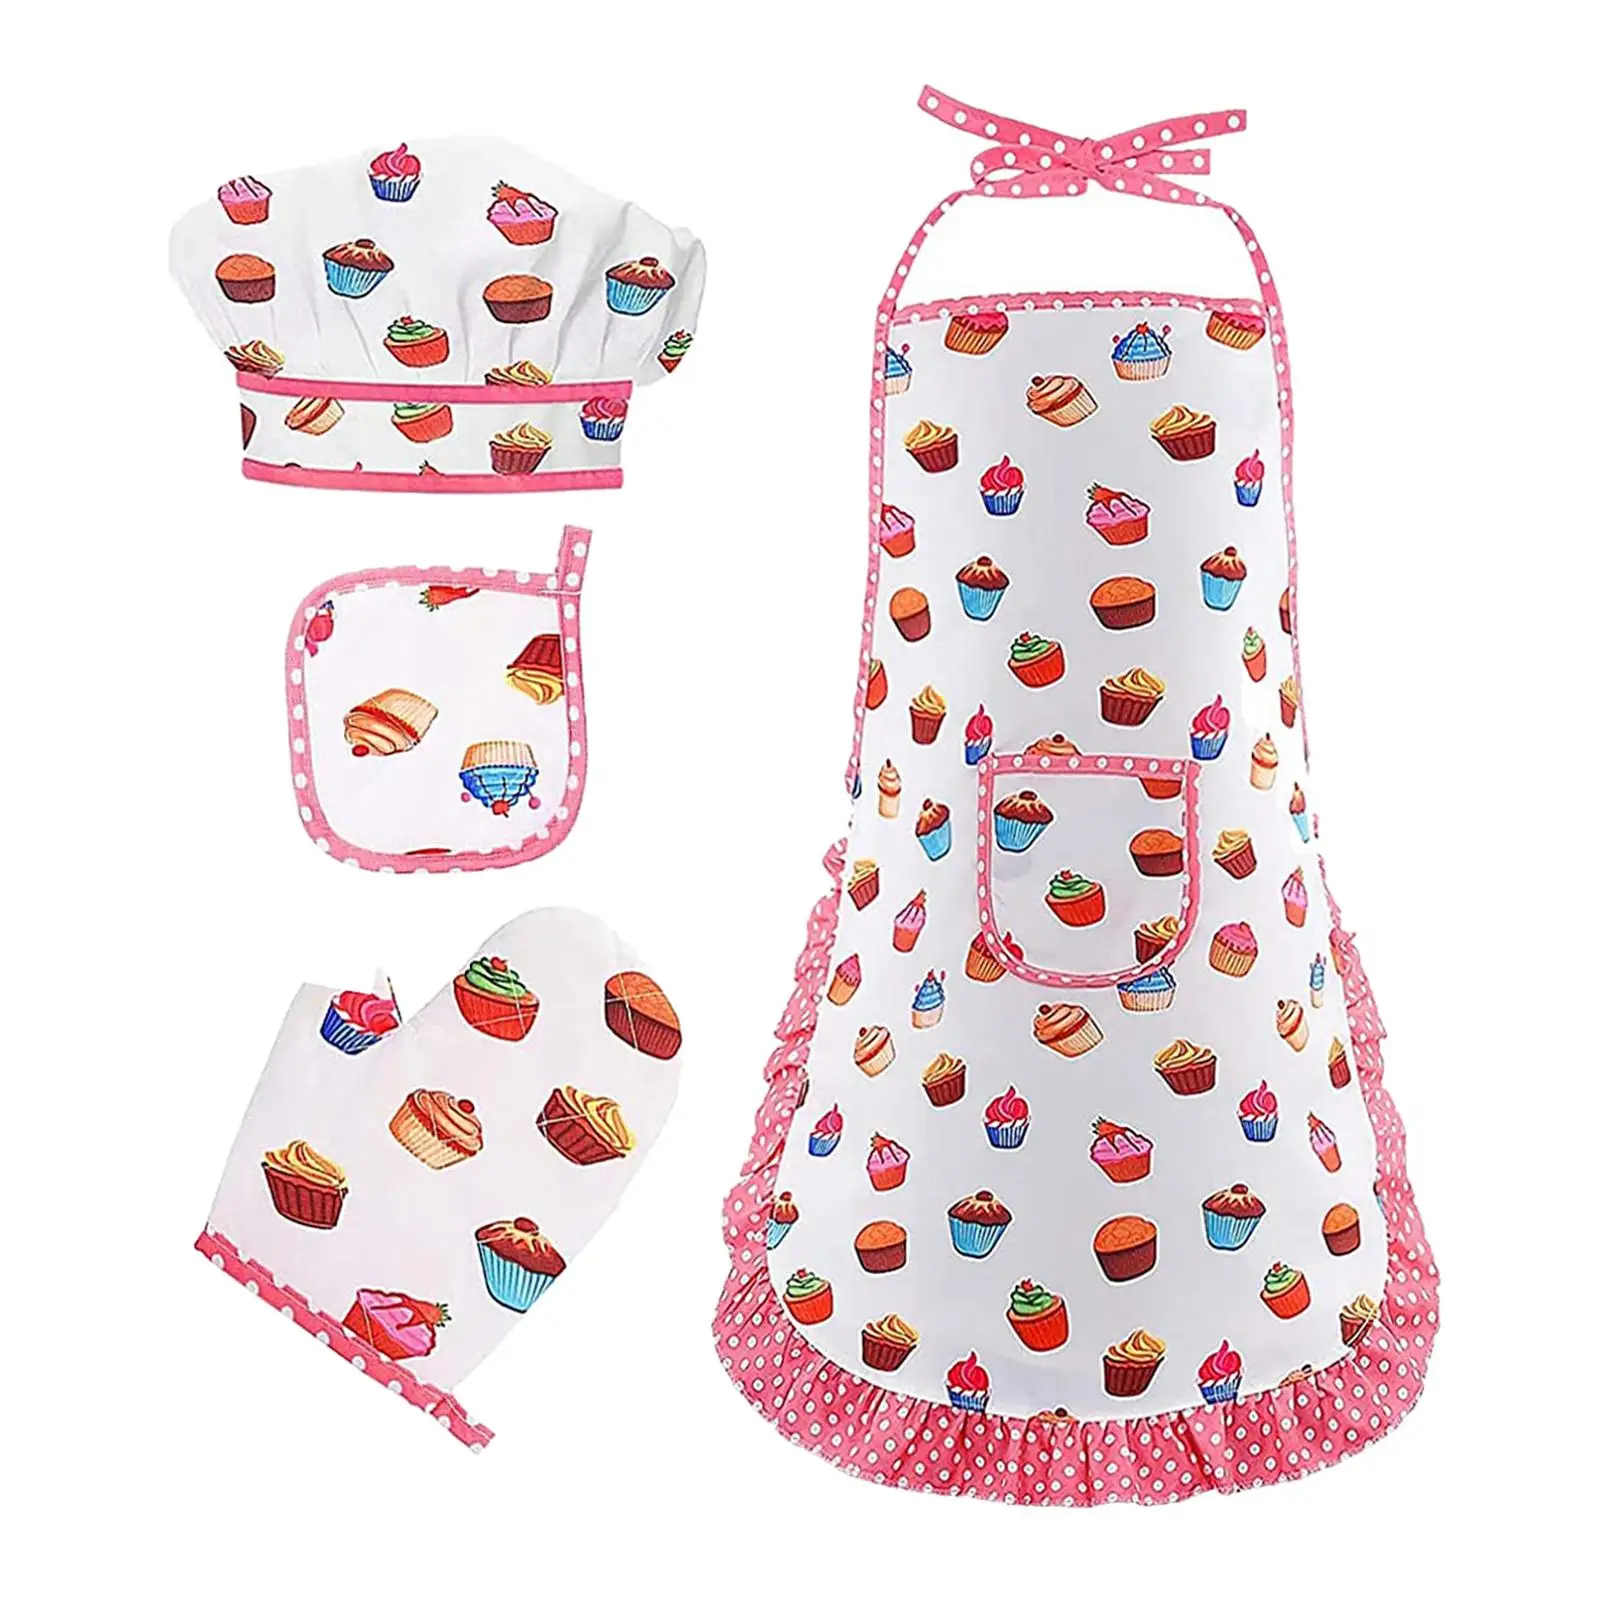 Montessori Clothes Set Role Play Toy Oven Mitts Hat for Kids Children